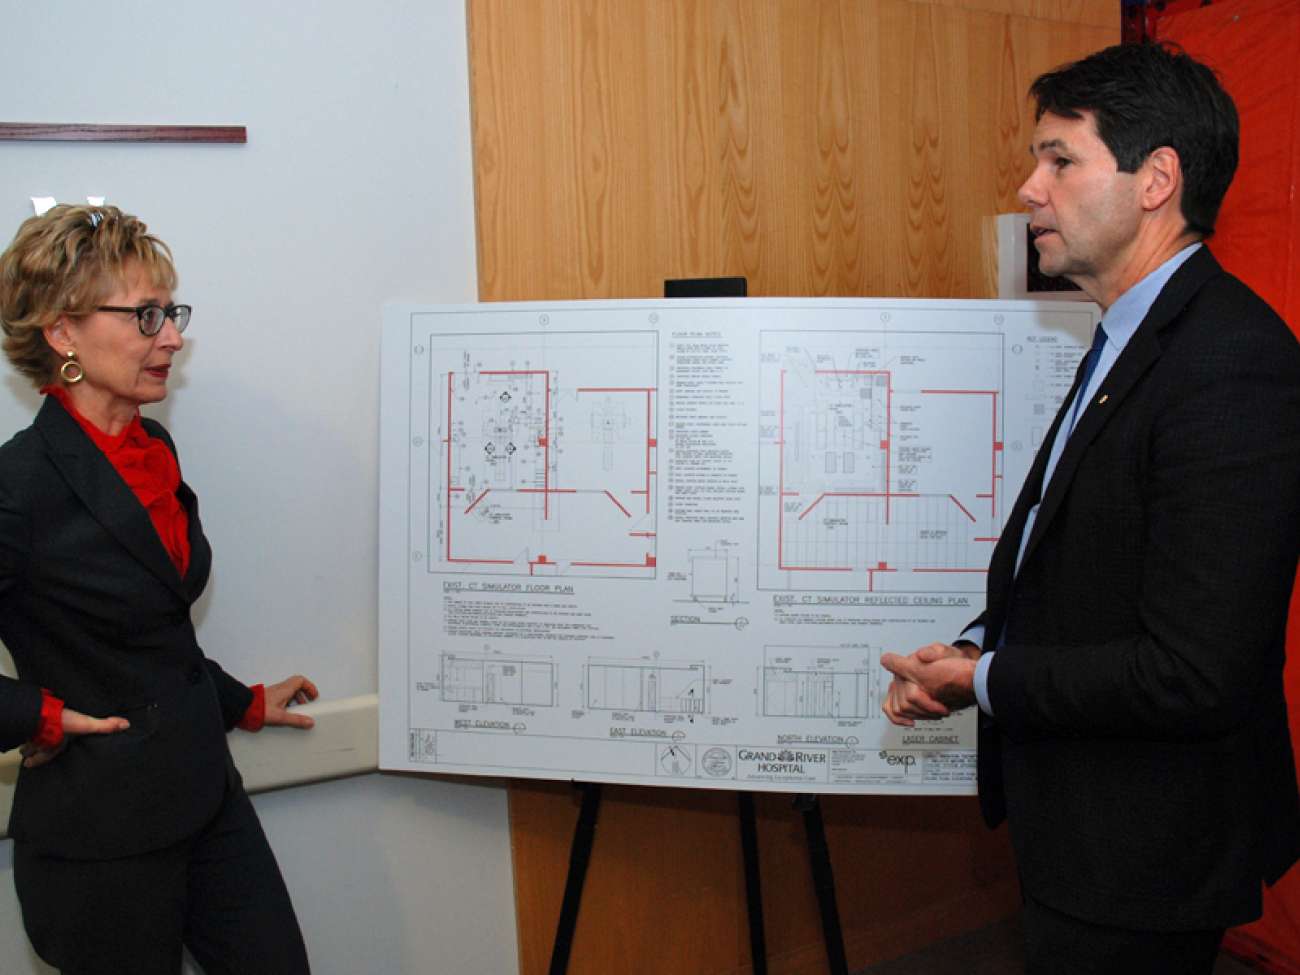 MPP Daiene Vernile and Minister Hoskins review renovation plans to install a second CT simulator at GRH.